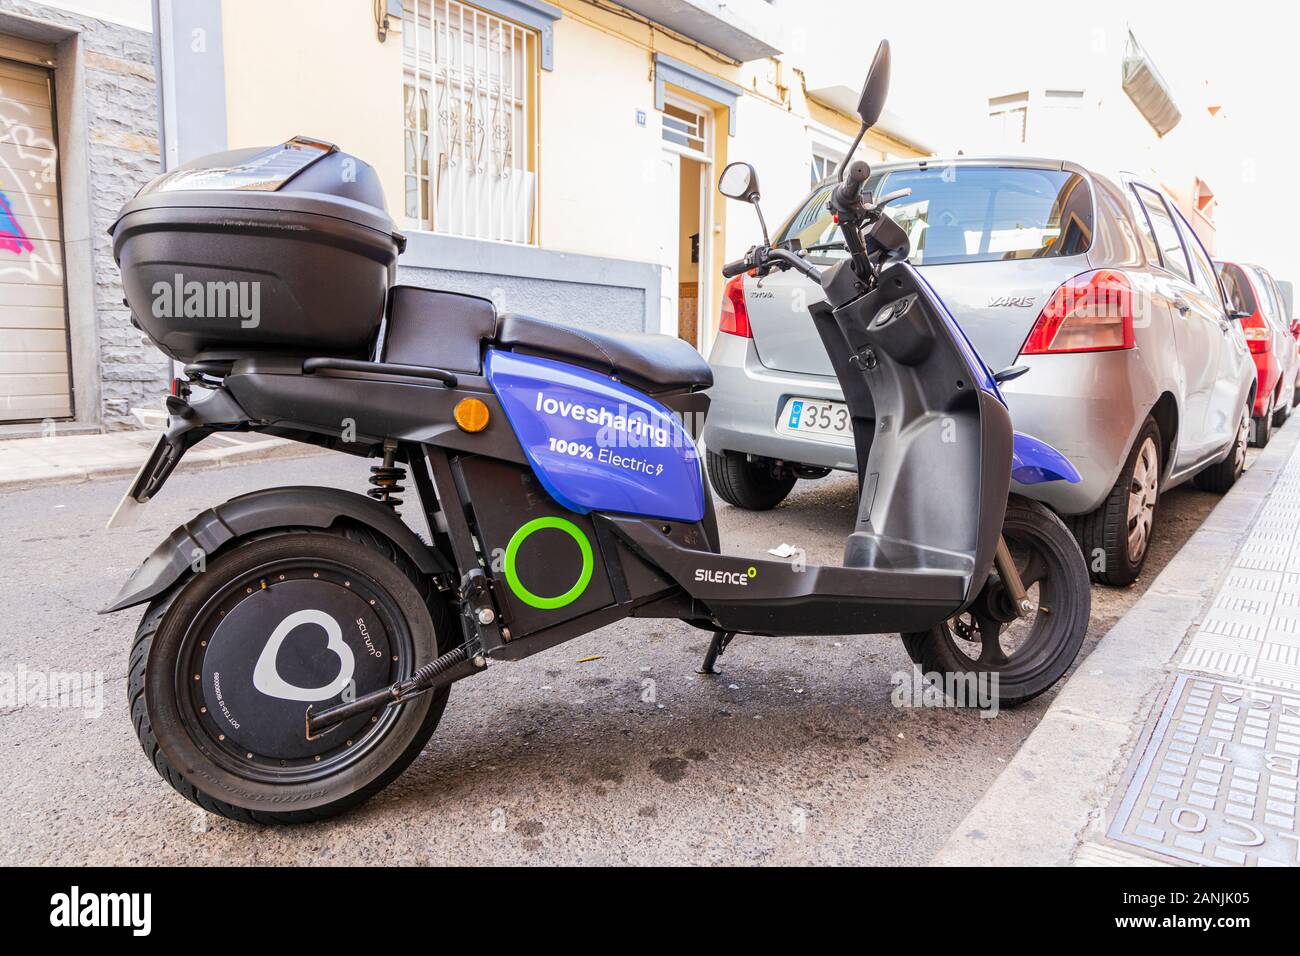 Electric scooter parked in Santa Cruz, available for hire, sharing as part of a sustainable transport scheme in the city, Tenerife, Canary Islands, Sp Stock Photo